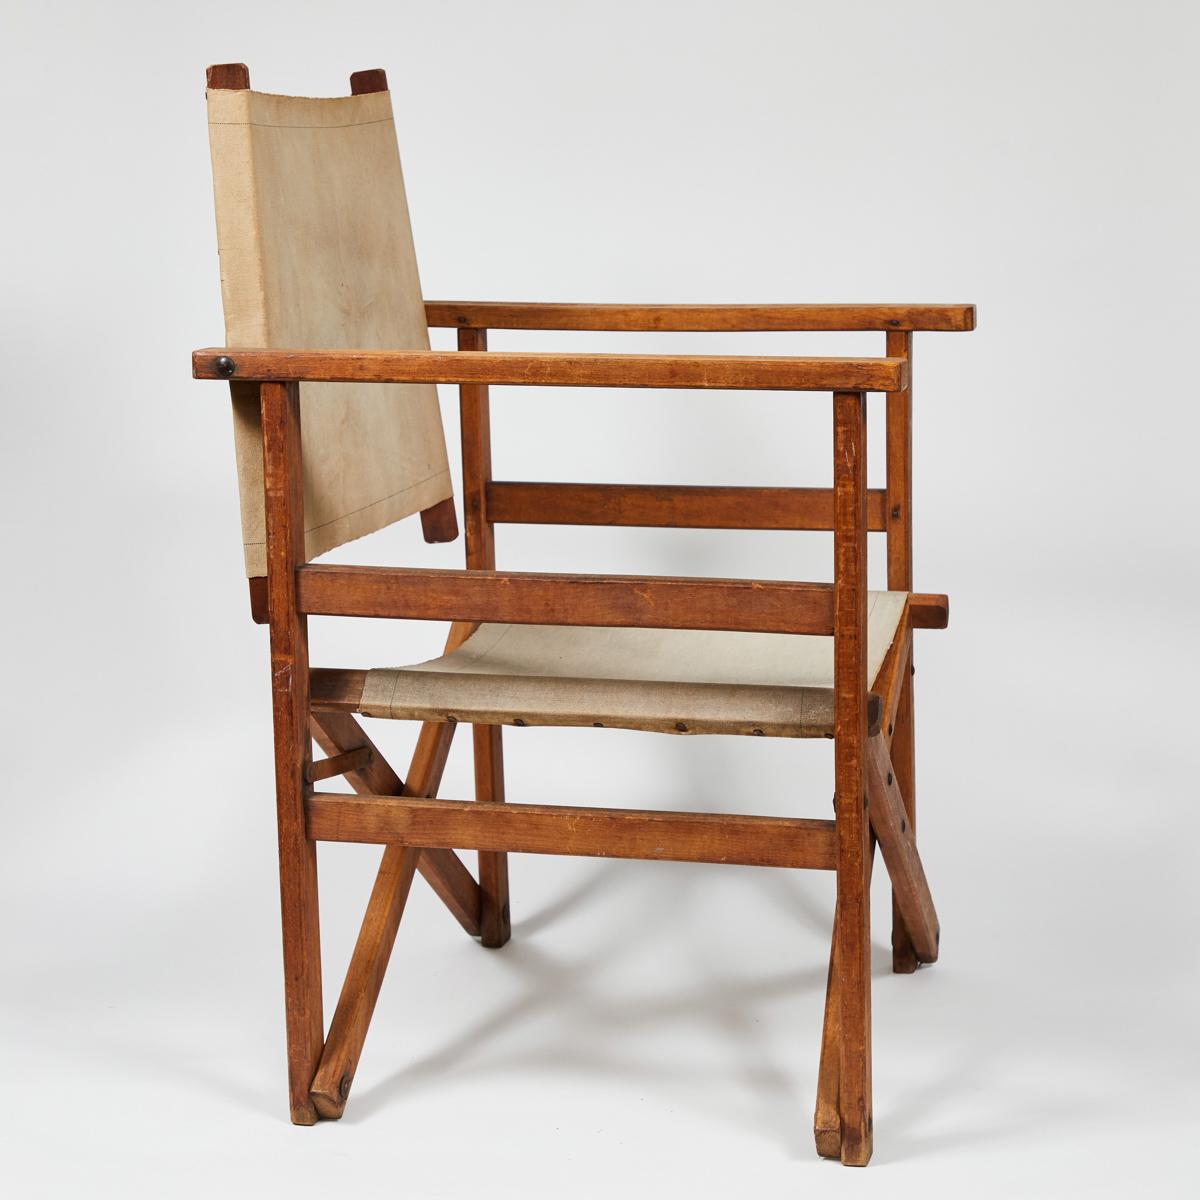 Early 20th-century collapsible wooden director's chair from England. With original cream-colored canvas seat and small metal bolt details, this design classic has great patina and an outdoorsy appeal.

England, circa 1900

Dimensions: 21.5W x 22D x